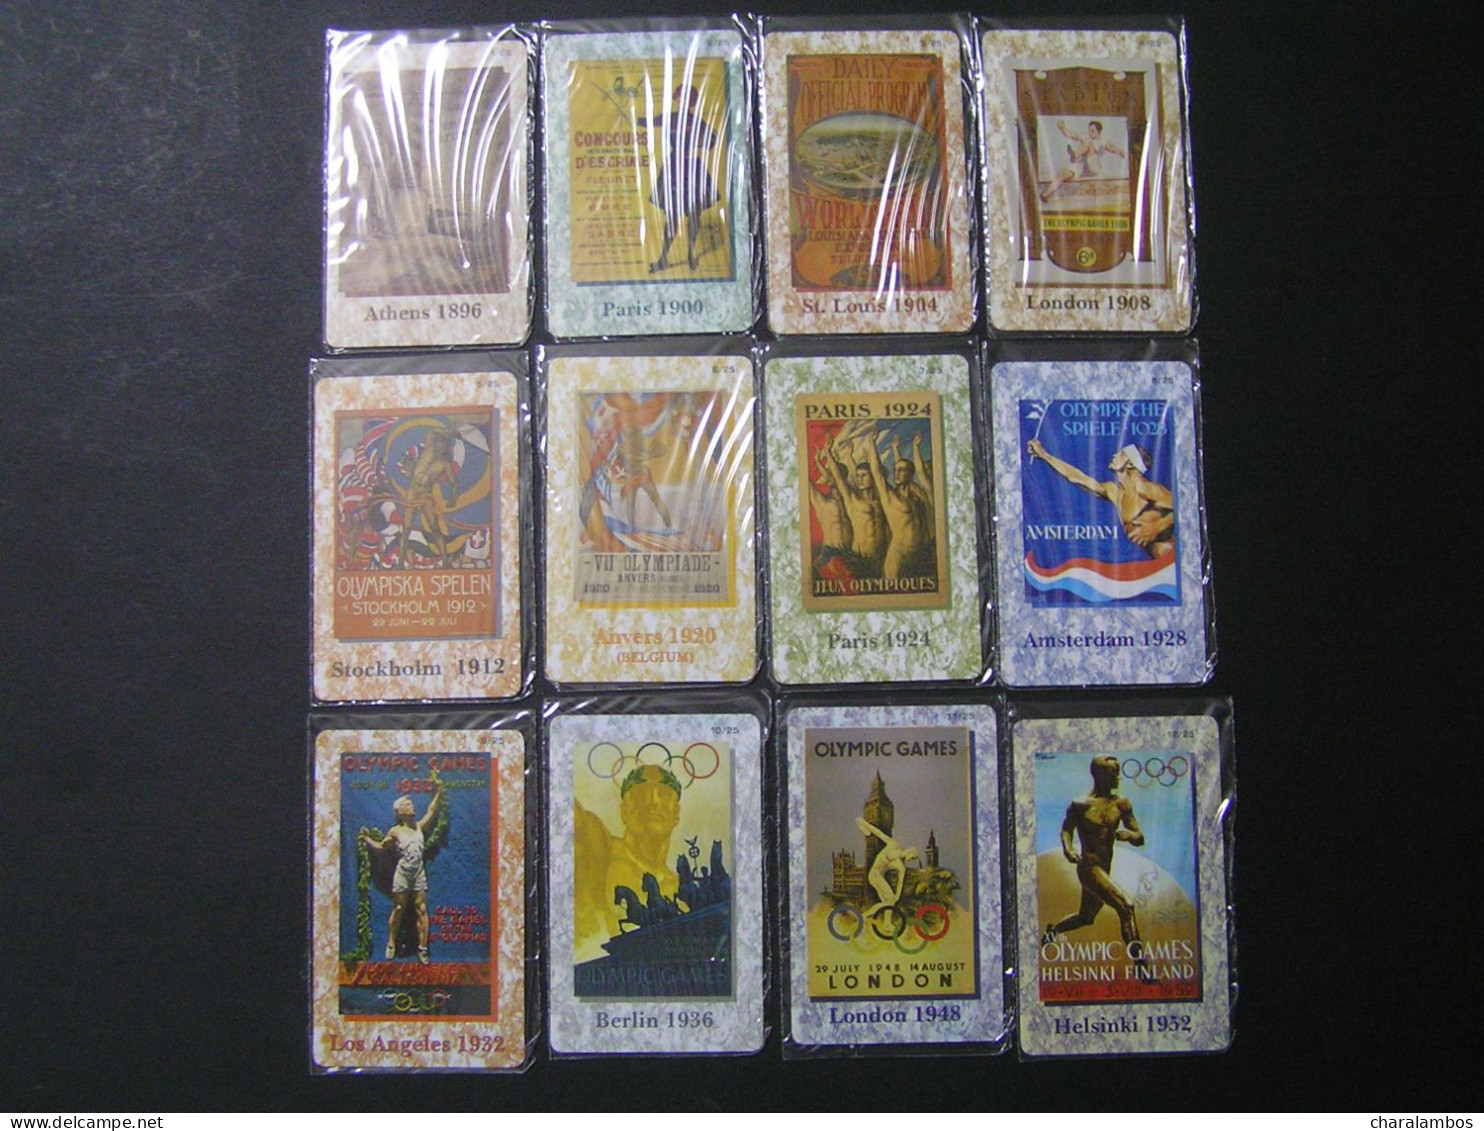 GREECE OLYMPIADS 1896-2004 25 Collectors Telephone Cards DVD ANCIENT OLYMPIA Birthplace Of The Olympic Games Folder Mind - Olympische Spelen